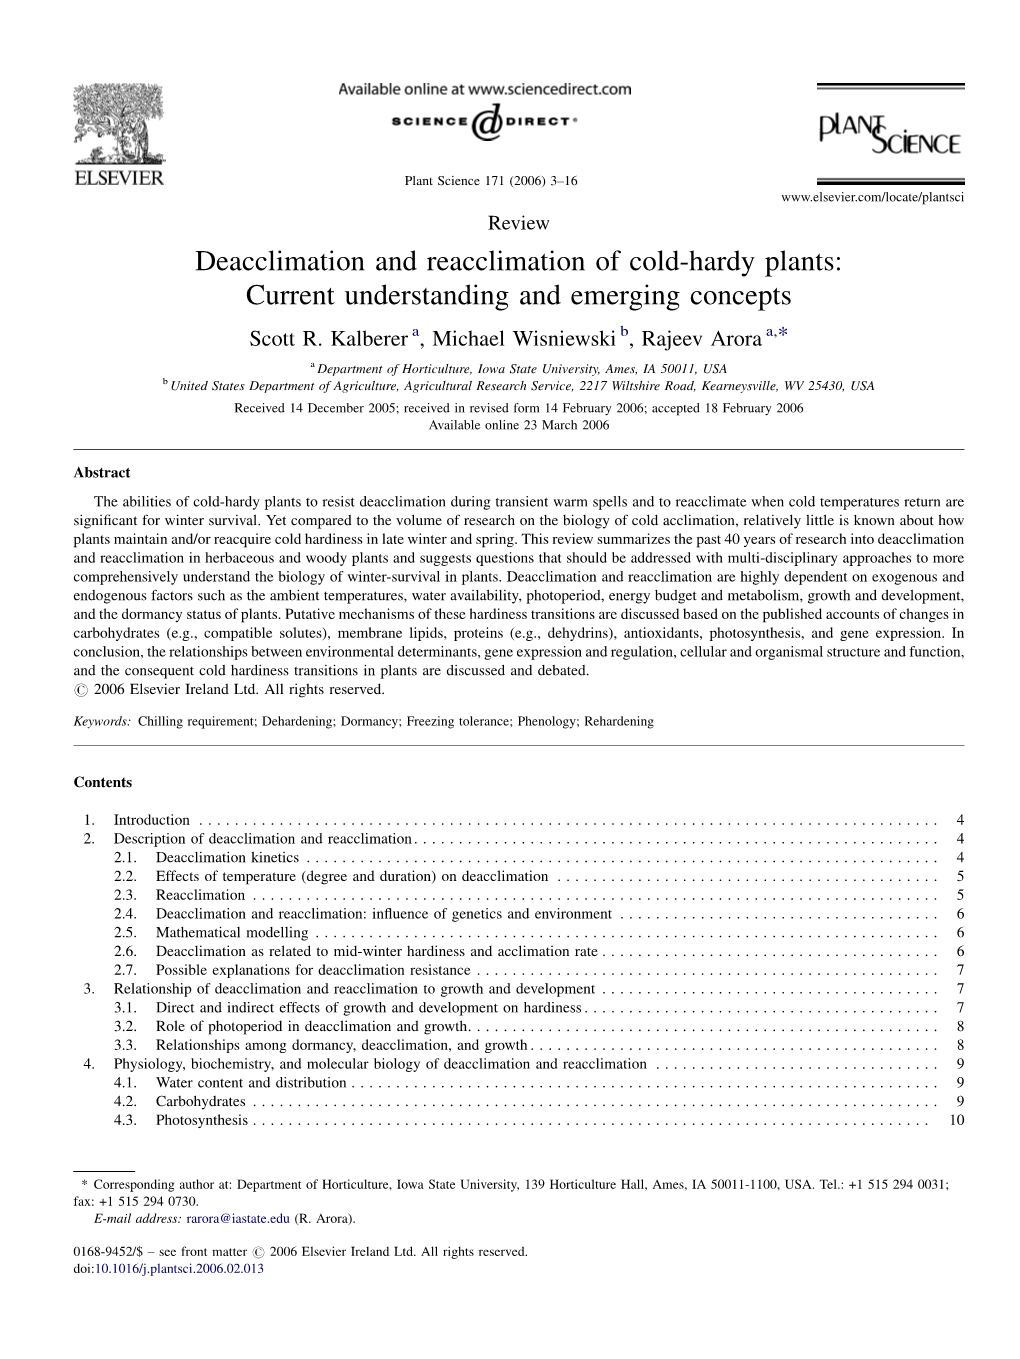 Deacclimation and Reacclimation of Cold-Hardy Plants: Current Understanding and Emerging Concepts Scott R